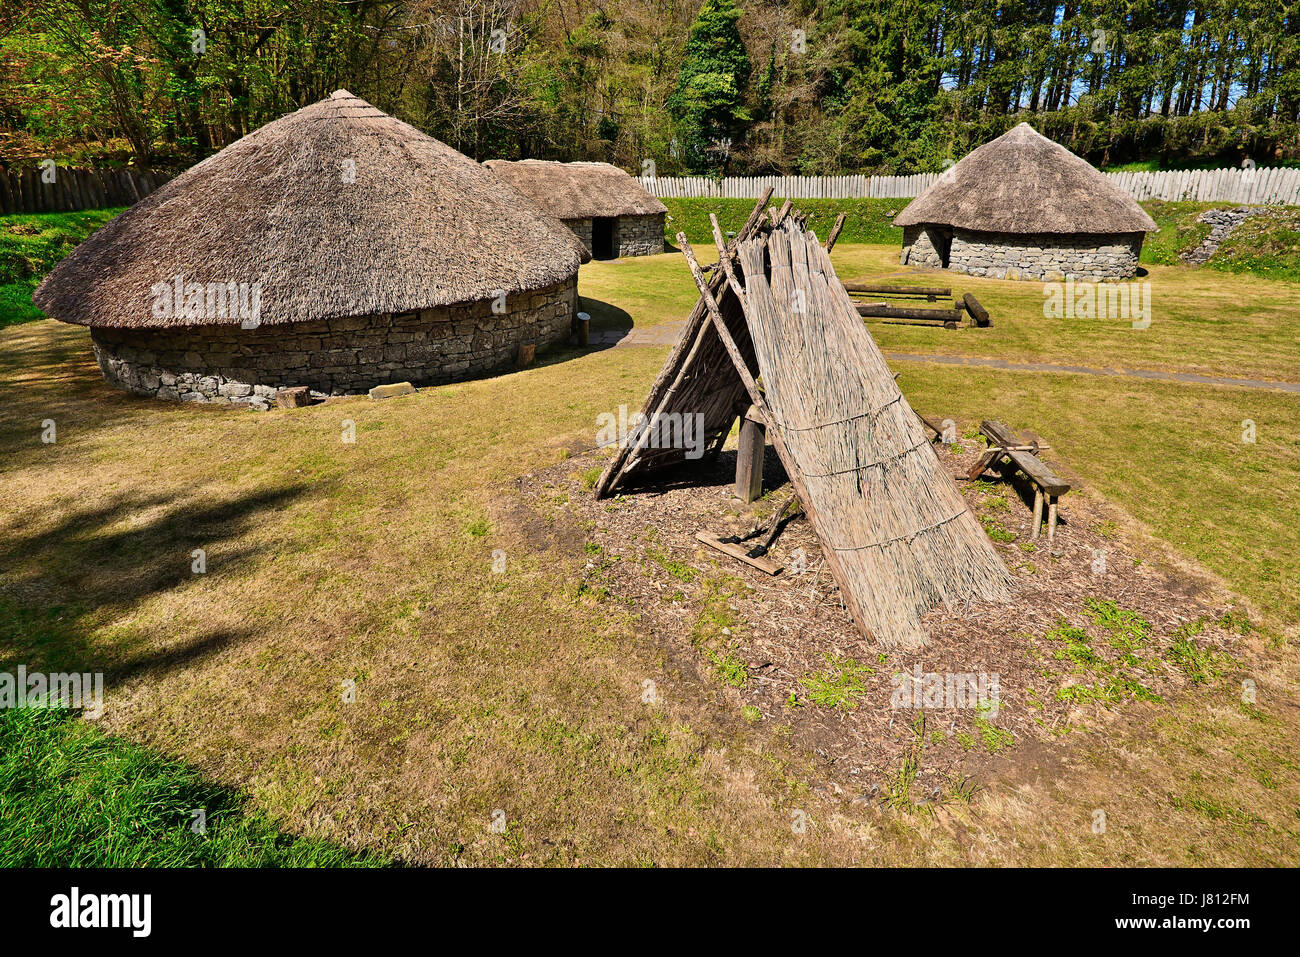 Ireland, County Clare, Craggaunowen, Living Past Experience, Reconstructed Ring Fort dwelling. Stock Photo